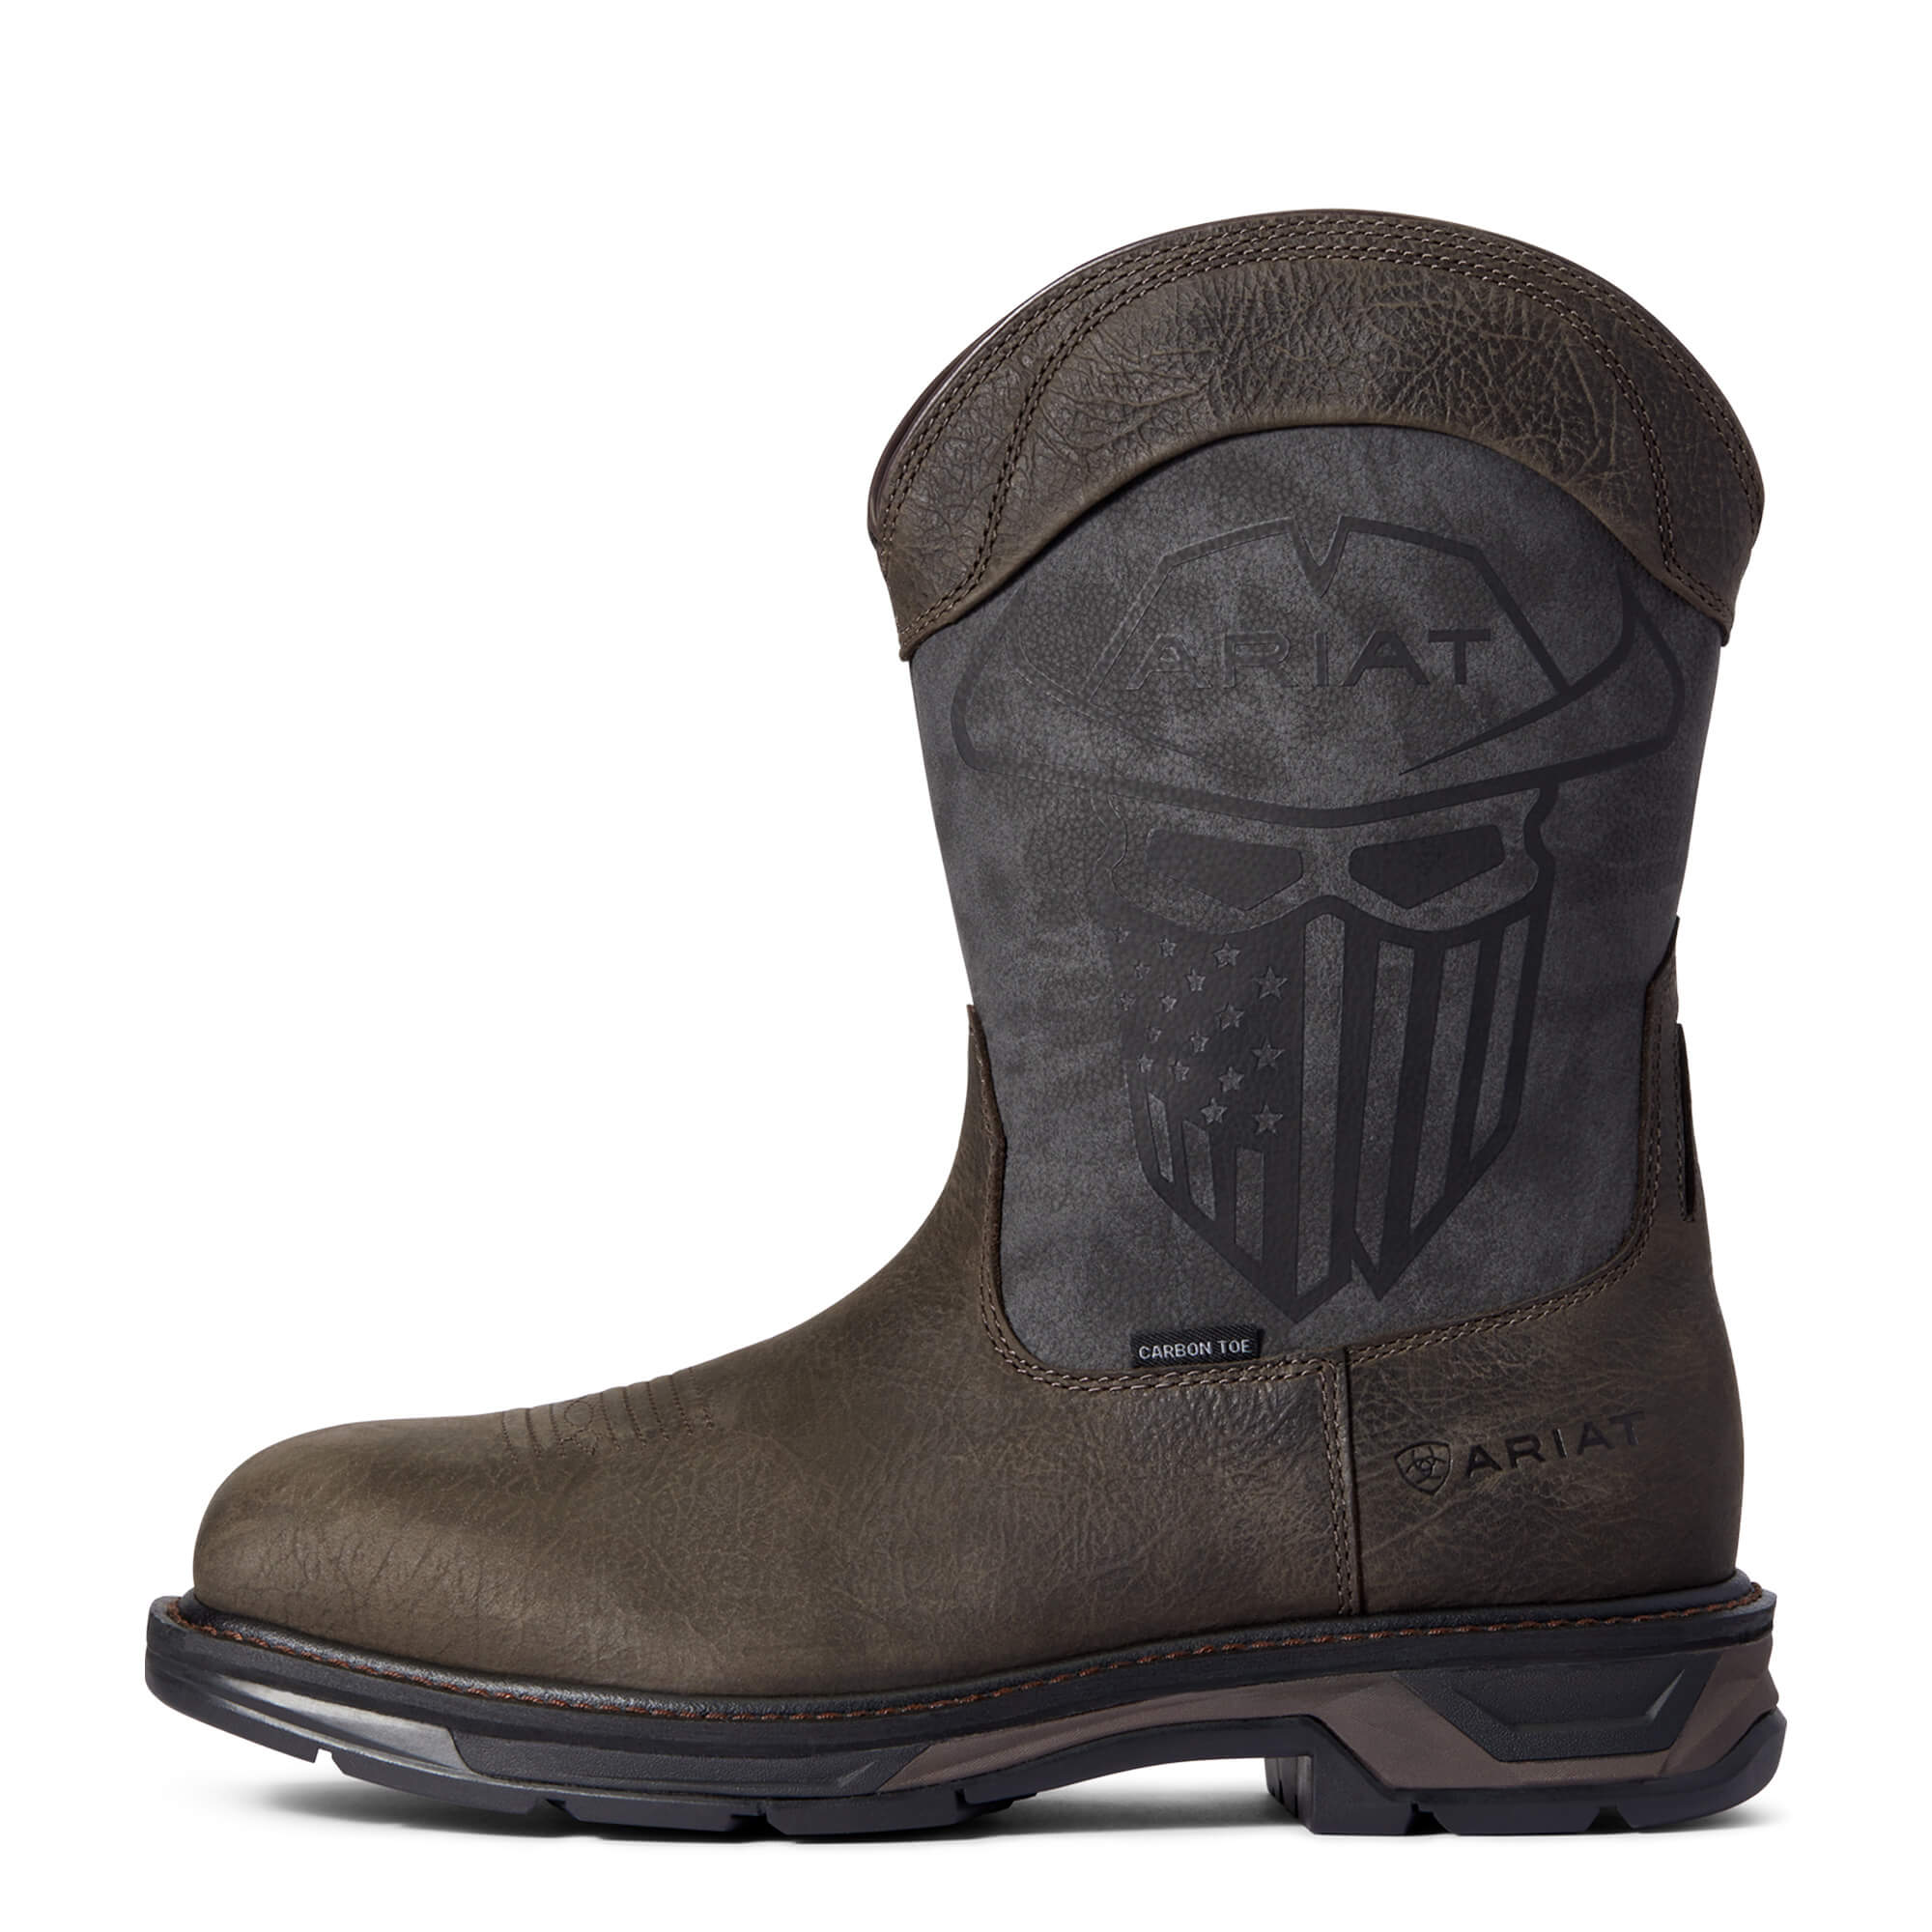 Ariat® WorkHog XT Incognito Carbon Toe Work Boot